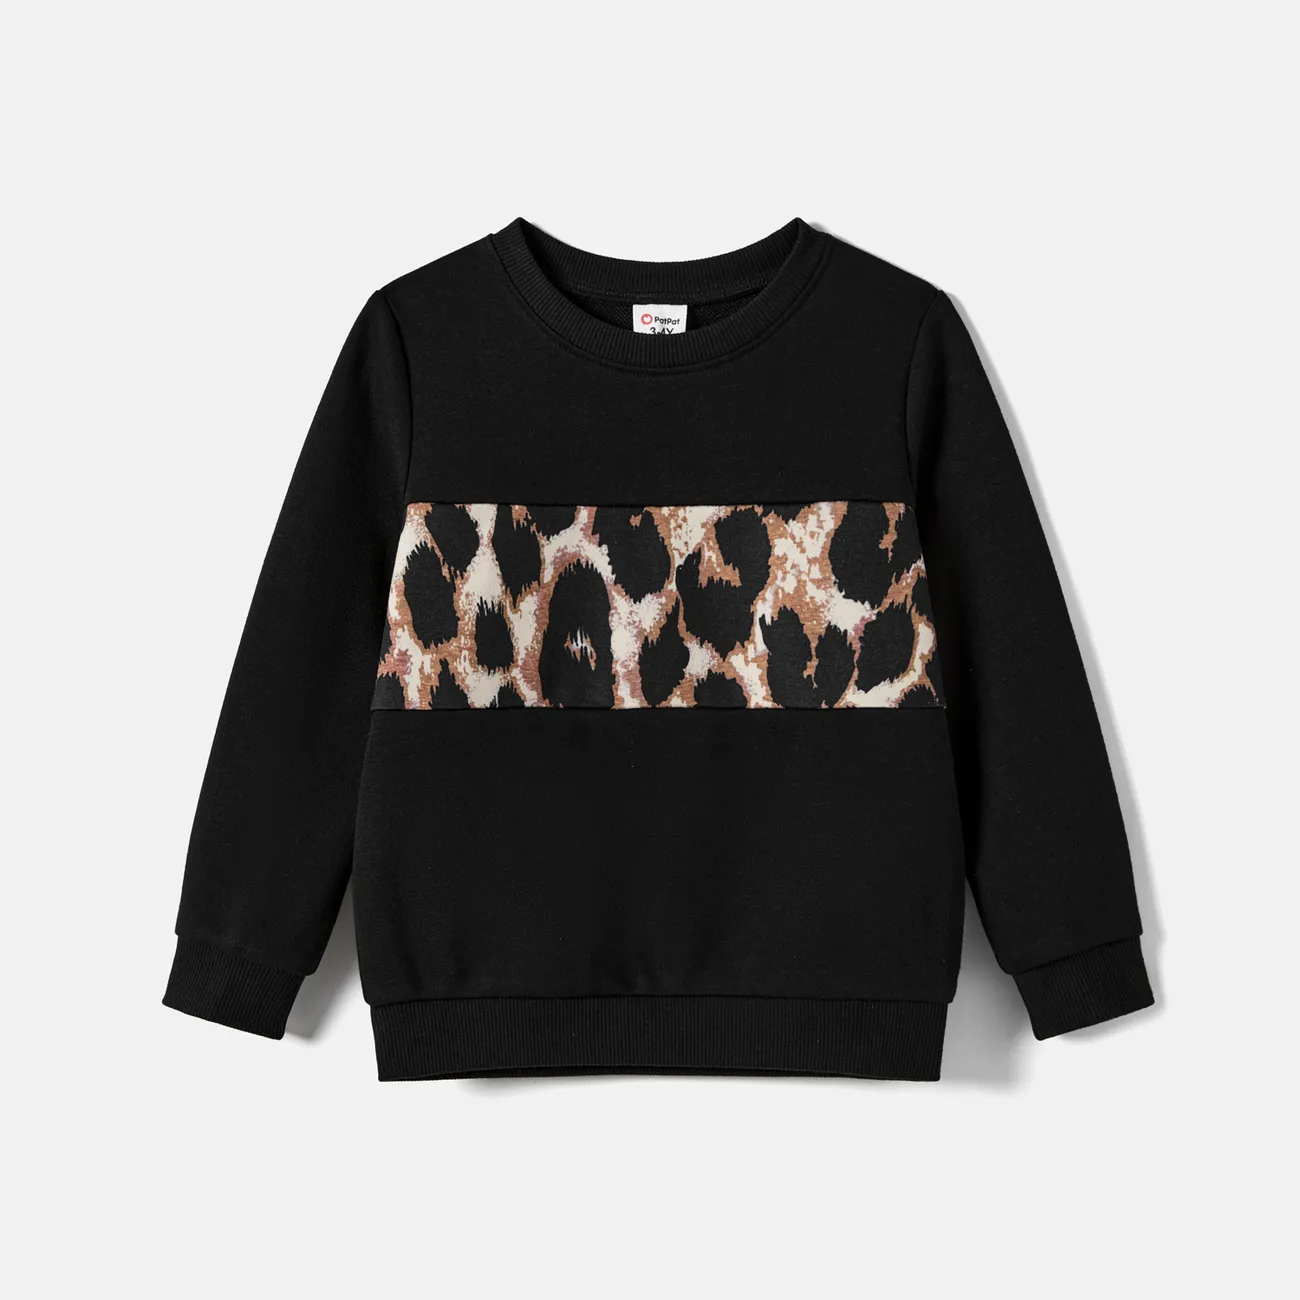 Family Matching Leopard Color Block Long-sleeve Tops  big image 1